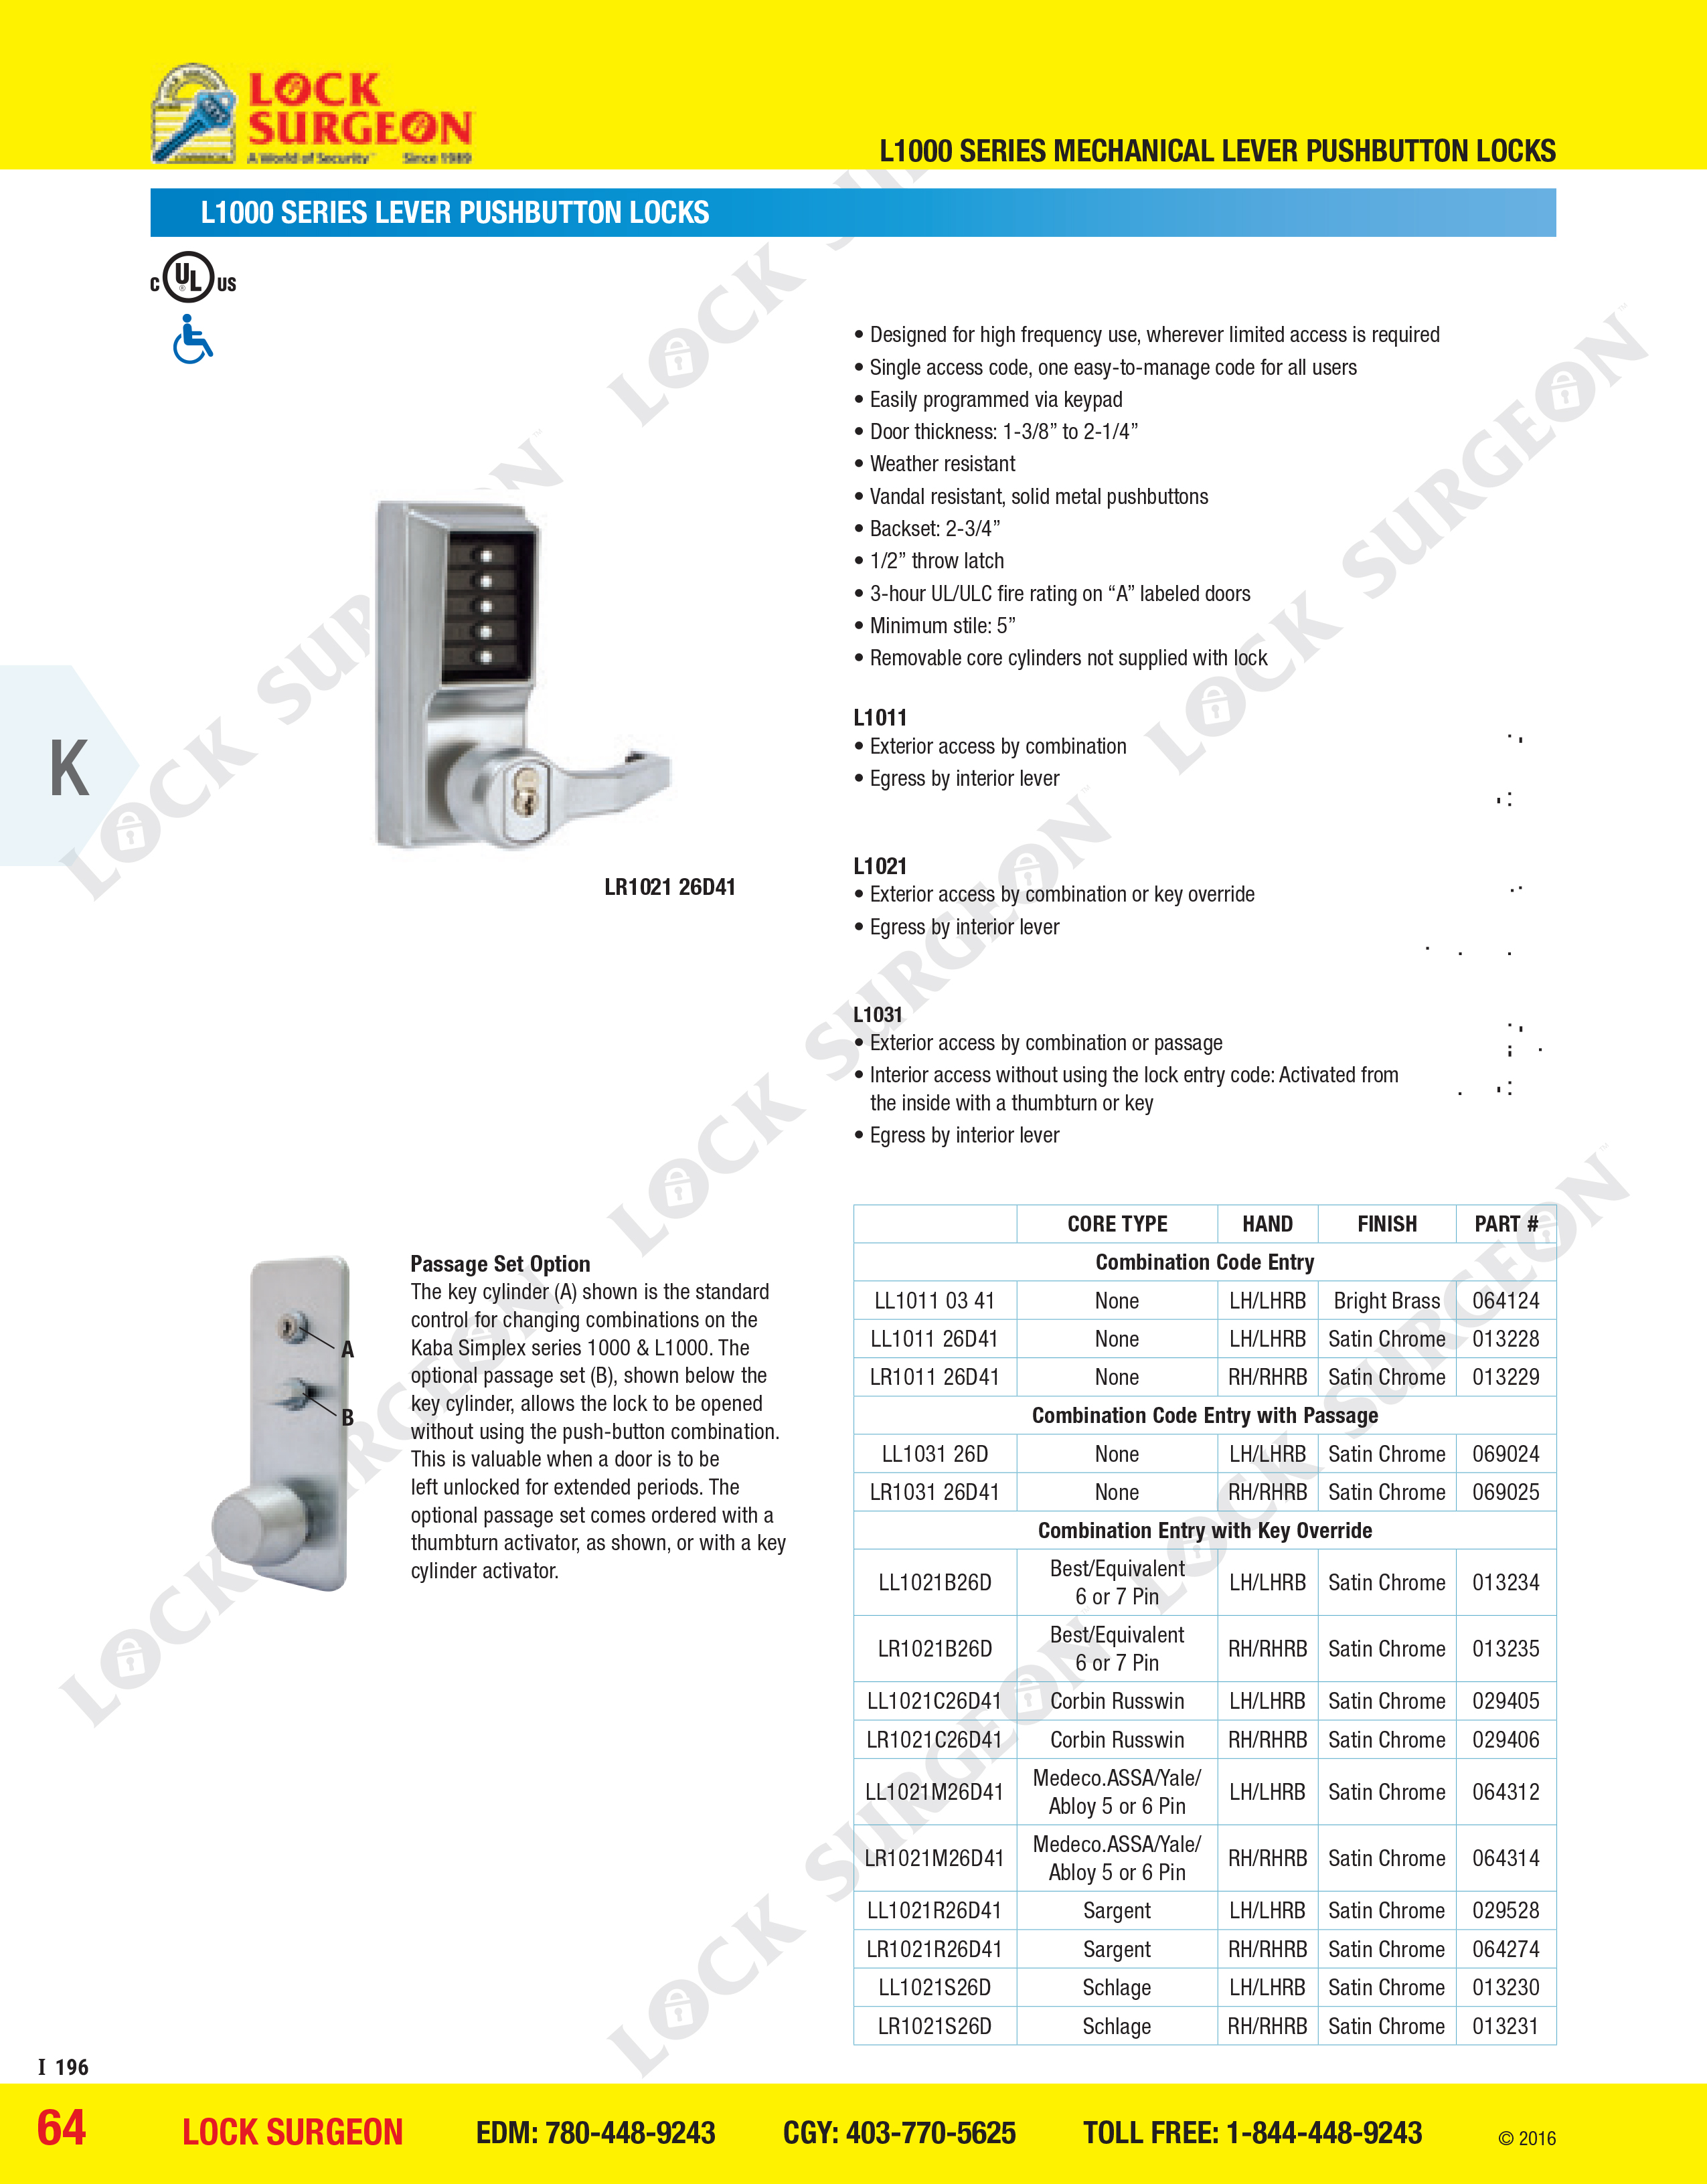 Acheson Kaba-Unican L-1000series mechanical lever push-button locks where lever handles is preferred